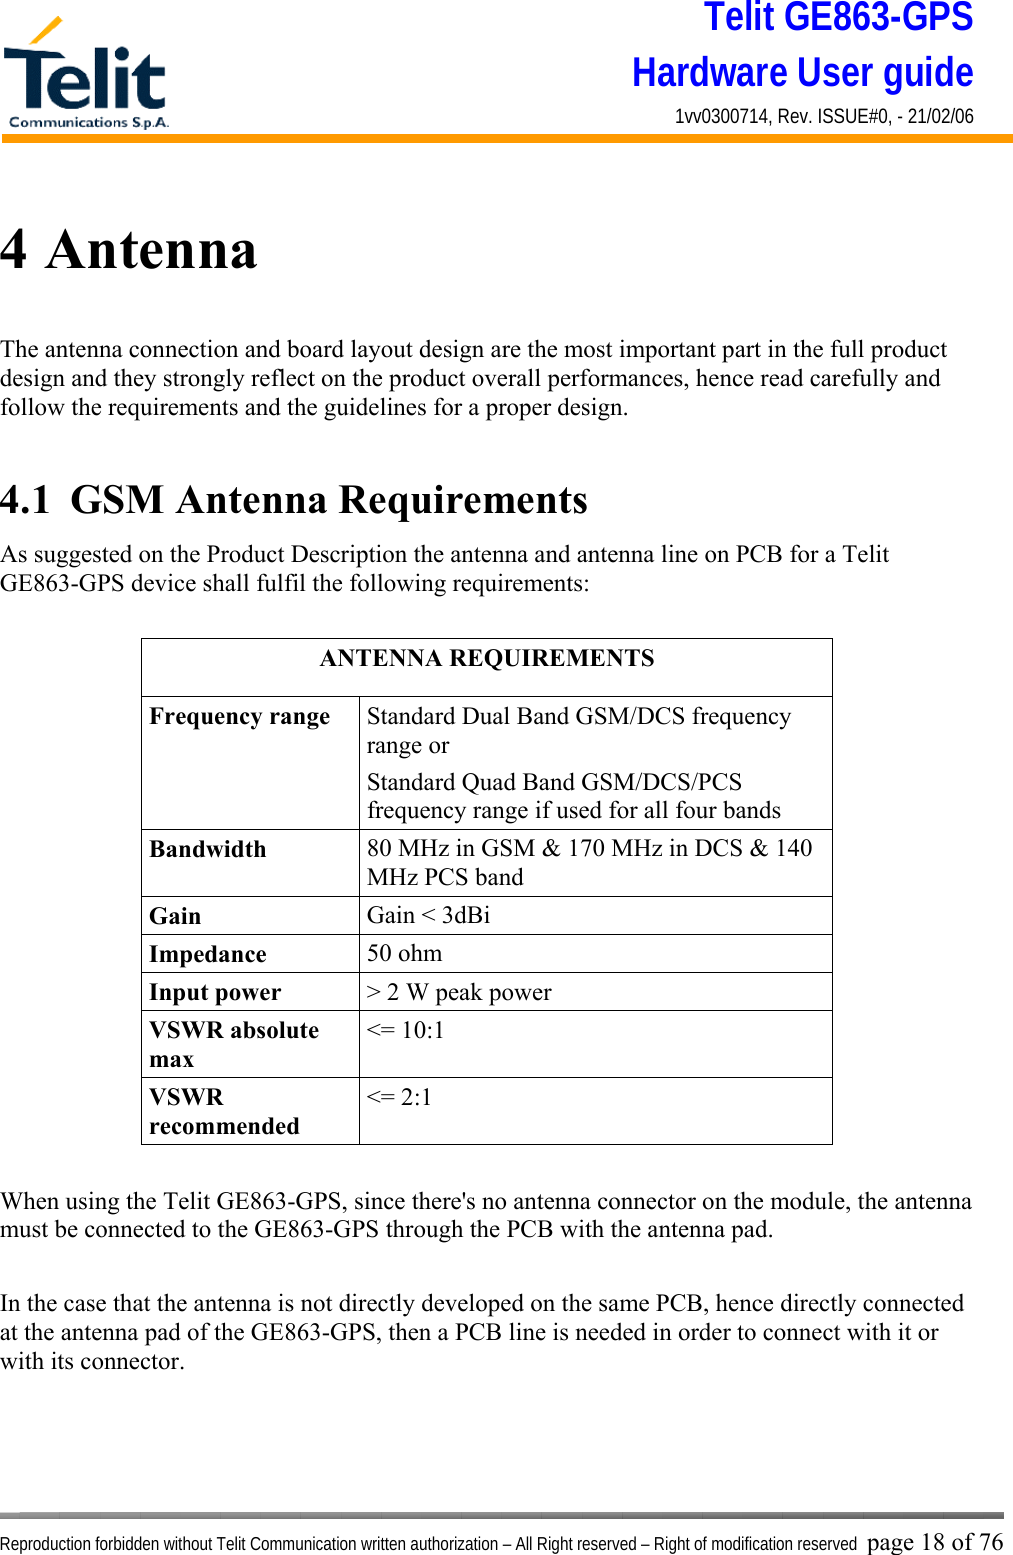 Telit GE863-GPS Hardware User guide 1vv0300714, Rev. ISSUE#0, - 21/02/06    Reproduction forbidden without Telit Communication written authorization – All Right reserved – Right of modification reserved page 18 of 76 4 Antenna The antenna connection and board layout design are the most important part in the full product design and they strongly reflect on the product overall performances, hence read carefully and follow the requirements and the guidelines for a proper design.  4.1  GSM Antenna Requirements As suggested on the Product Description the antenna and antenna line on PCB for a Telit GE863-GPS device shall fulfil the following requirements:  ANTENNA REQUIREMENTS Frequency range  Standard Dual Band GSM/DCS frequency range or  Standard Quad Band GSM/DCS/PCS frequency range if used for all four bands Bandwidth  80 MHz in GSM &amp; 170 MHz in DCS &amp; 140 MHz PCS band Gain  Gain &lt; 3dBi Impedance  50 ohm Input power  &gt; 2 W peak power VSWR absolute max &lt;= 10:1 VSWR recommended &lt;= 2:1  When using the Telit GE863-GPS, since there&apos;s no antenna connector on the module, the antenna must be connected to the GE863-GPS through the PCB with the antenna pad.  In the case that the antenna is not directly developed on the same PCB, hence directly connected at the antenna pad of the GE863-GPS, then a PCB line is needed in order to connect with it or with its connector.     